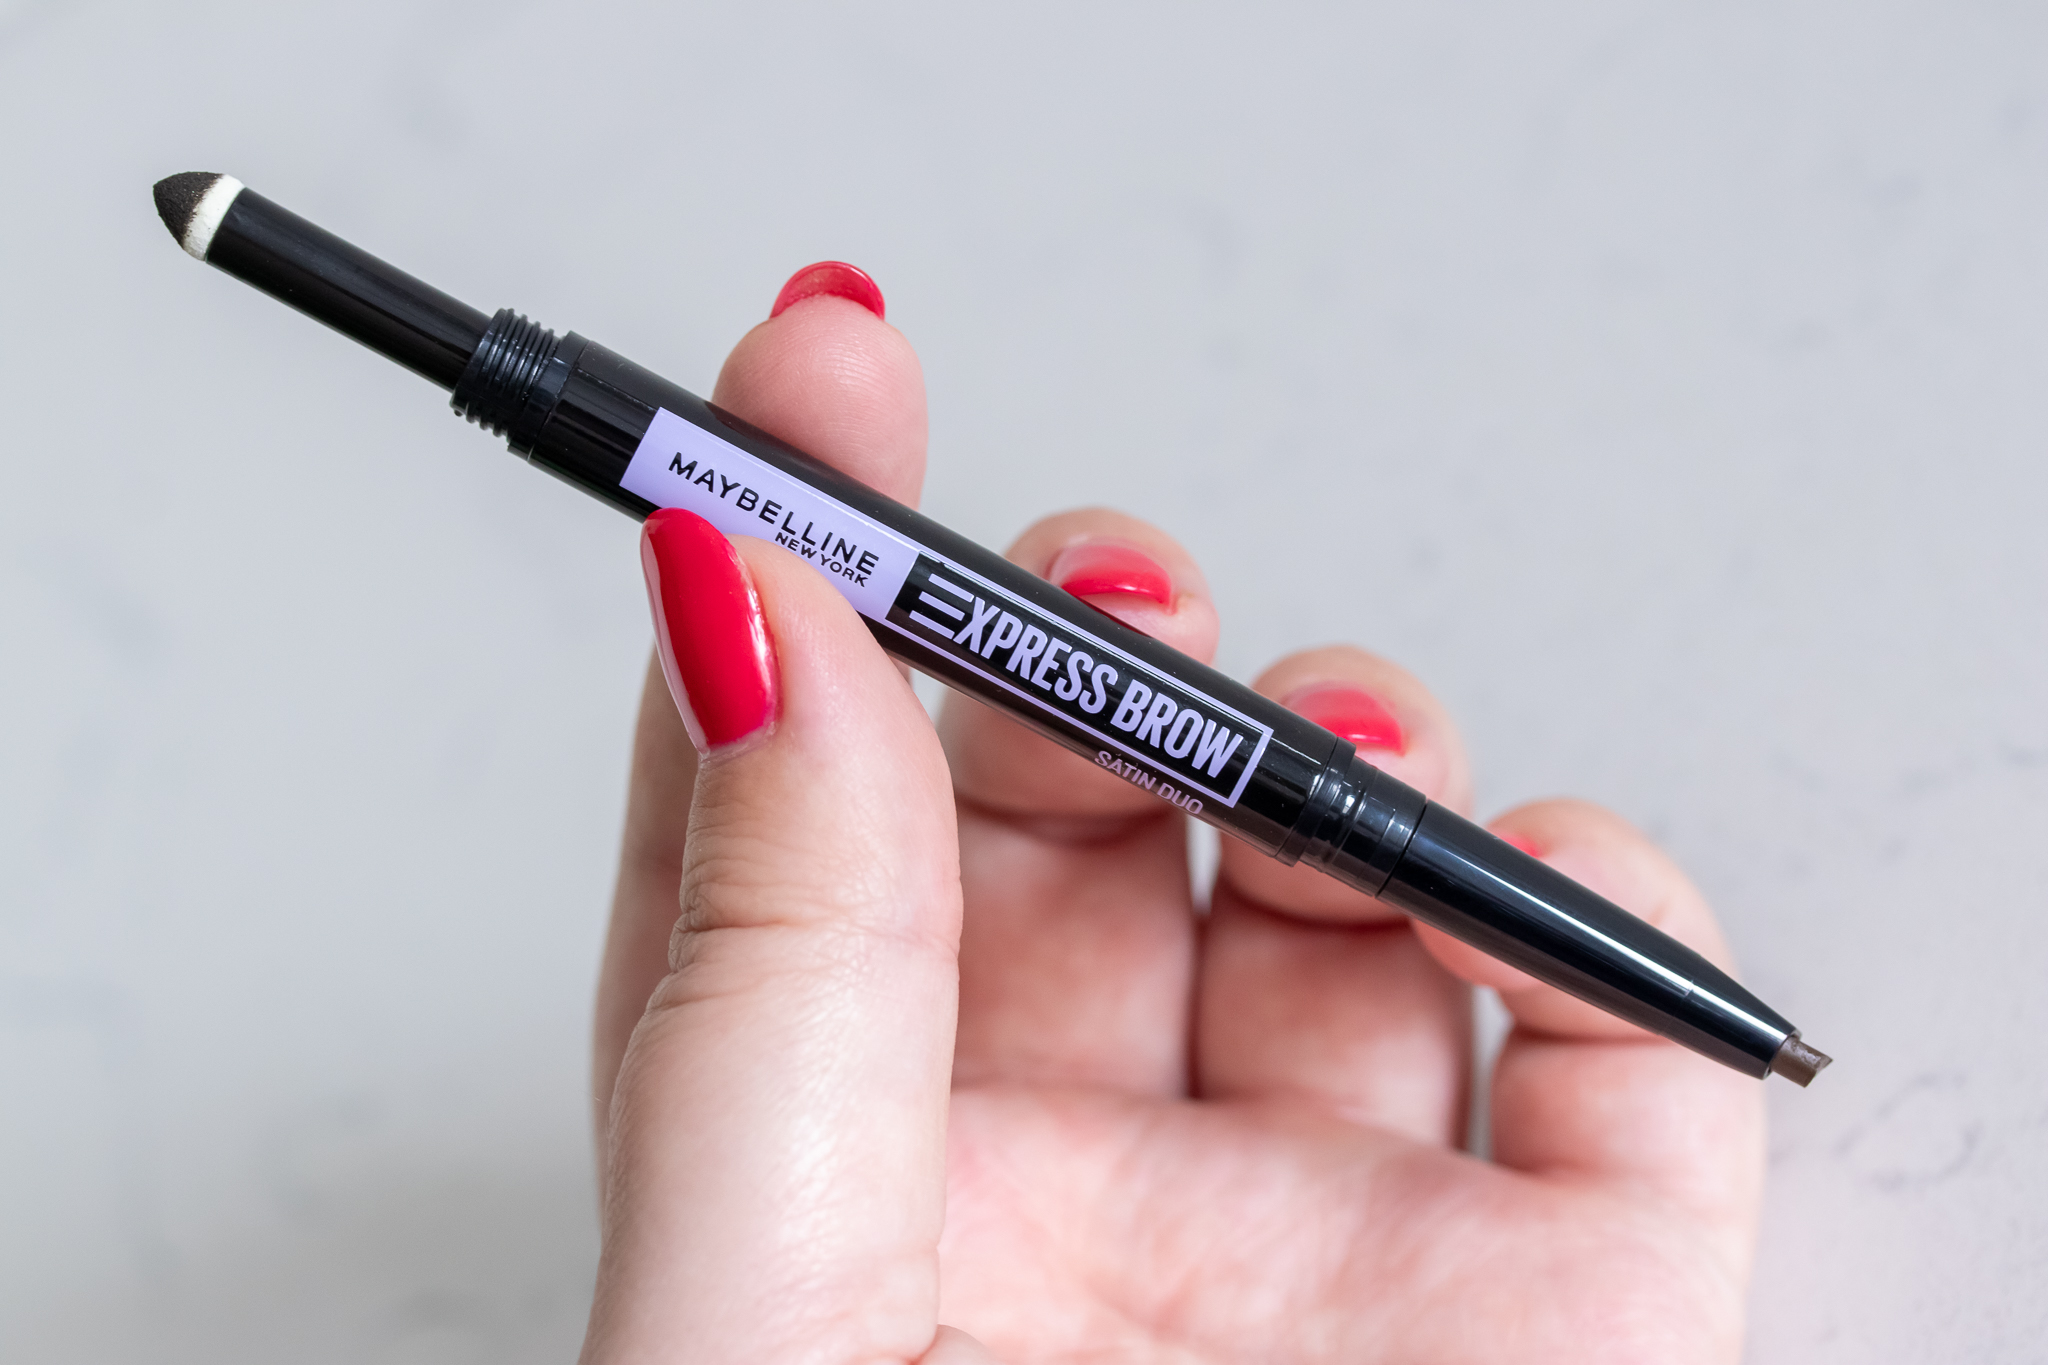 Maybelline Express Brow Duo